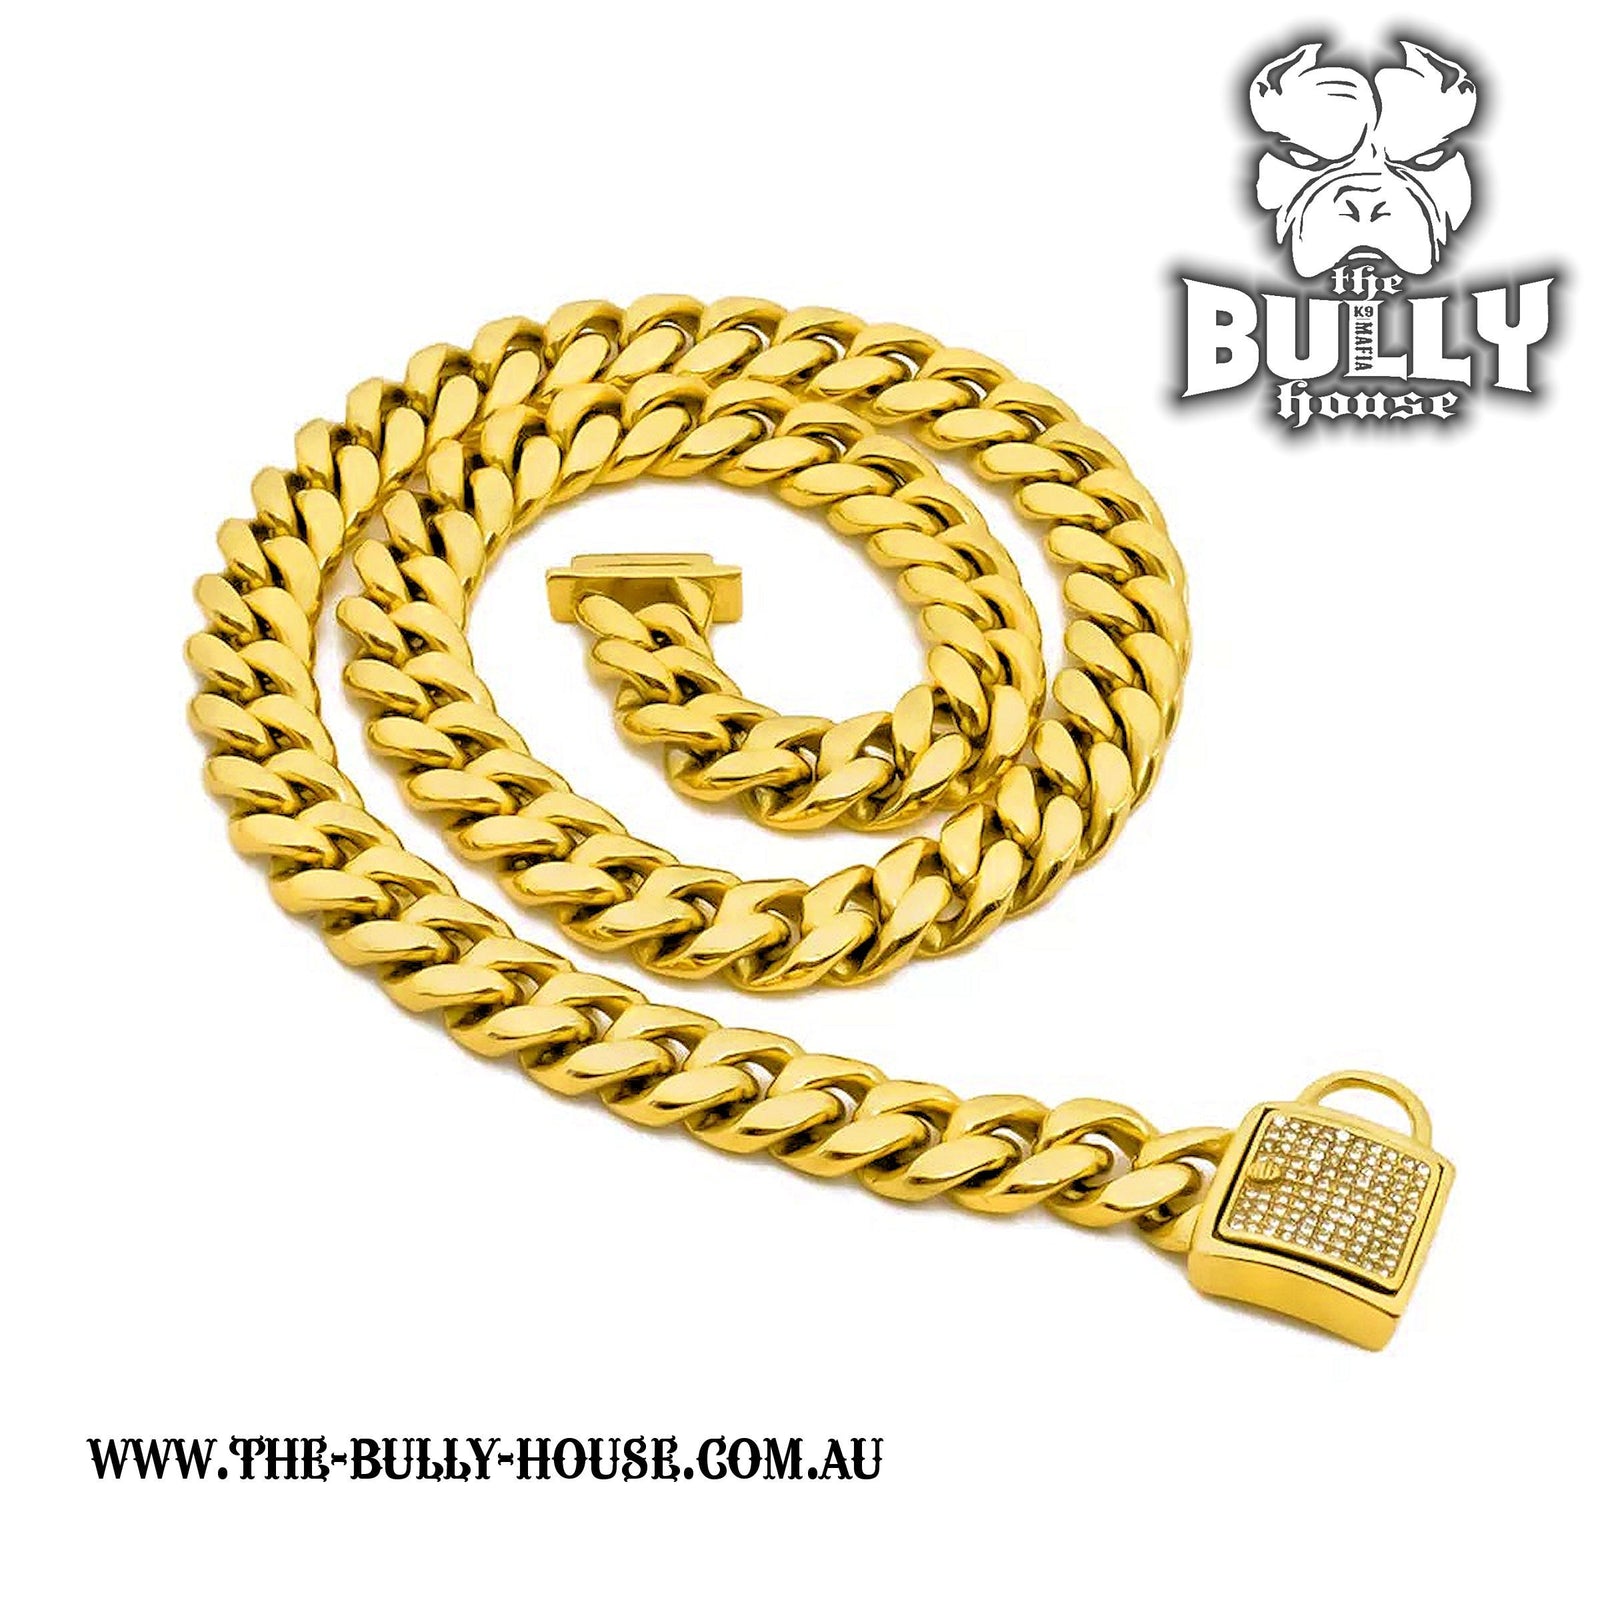 (Pre Order Now - Arriving approx end of DEC) The Bully House "MIAMI Diamond Padlock" - GOLD 14mm Wide -